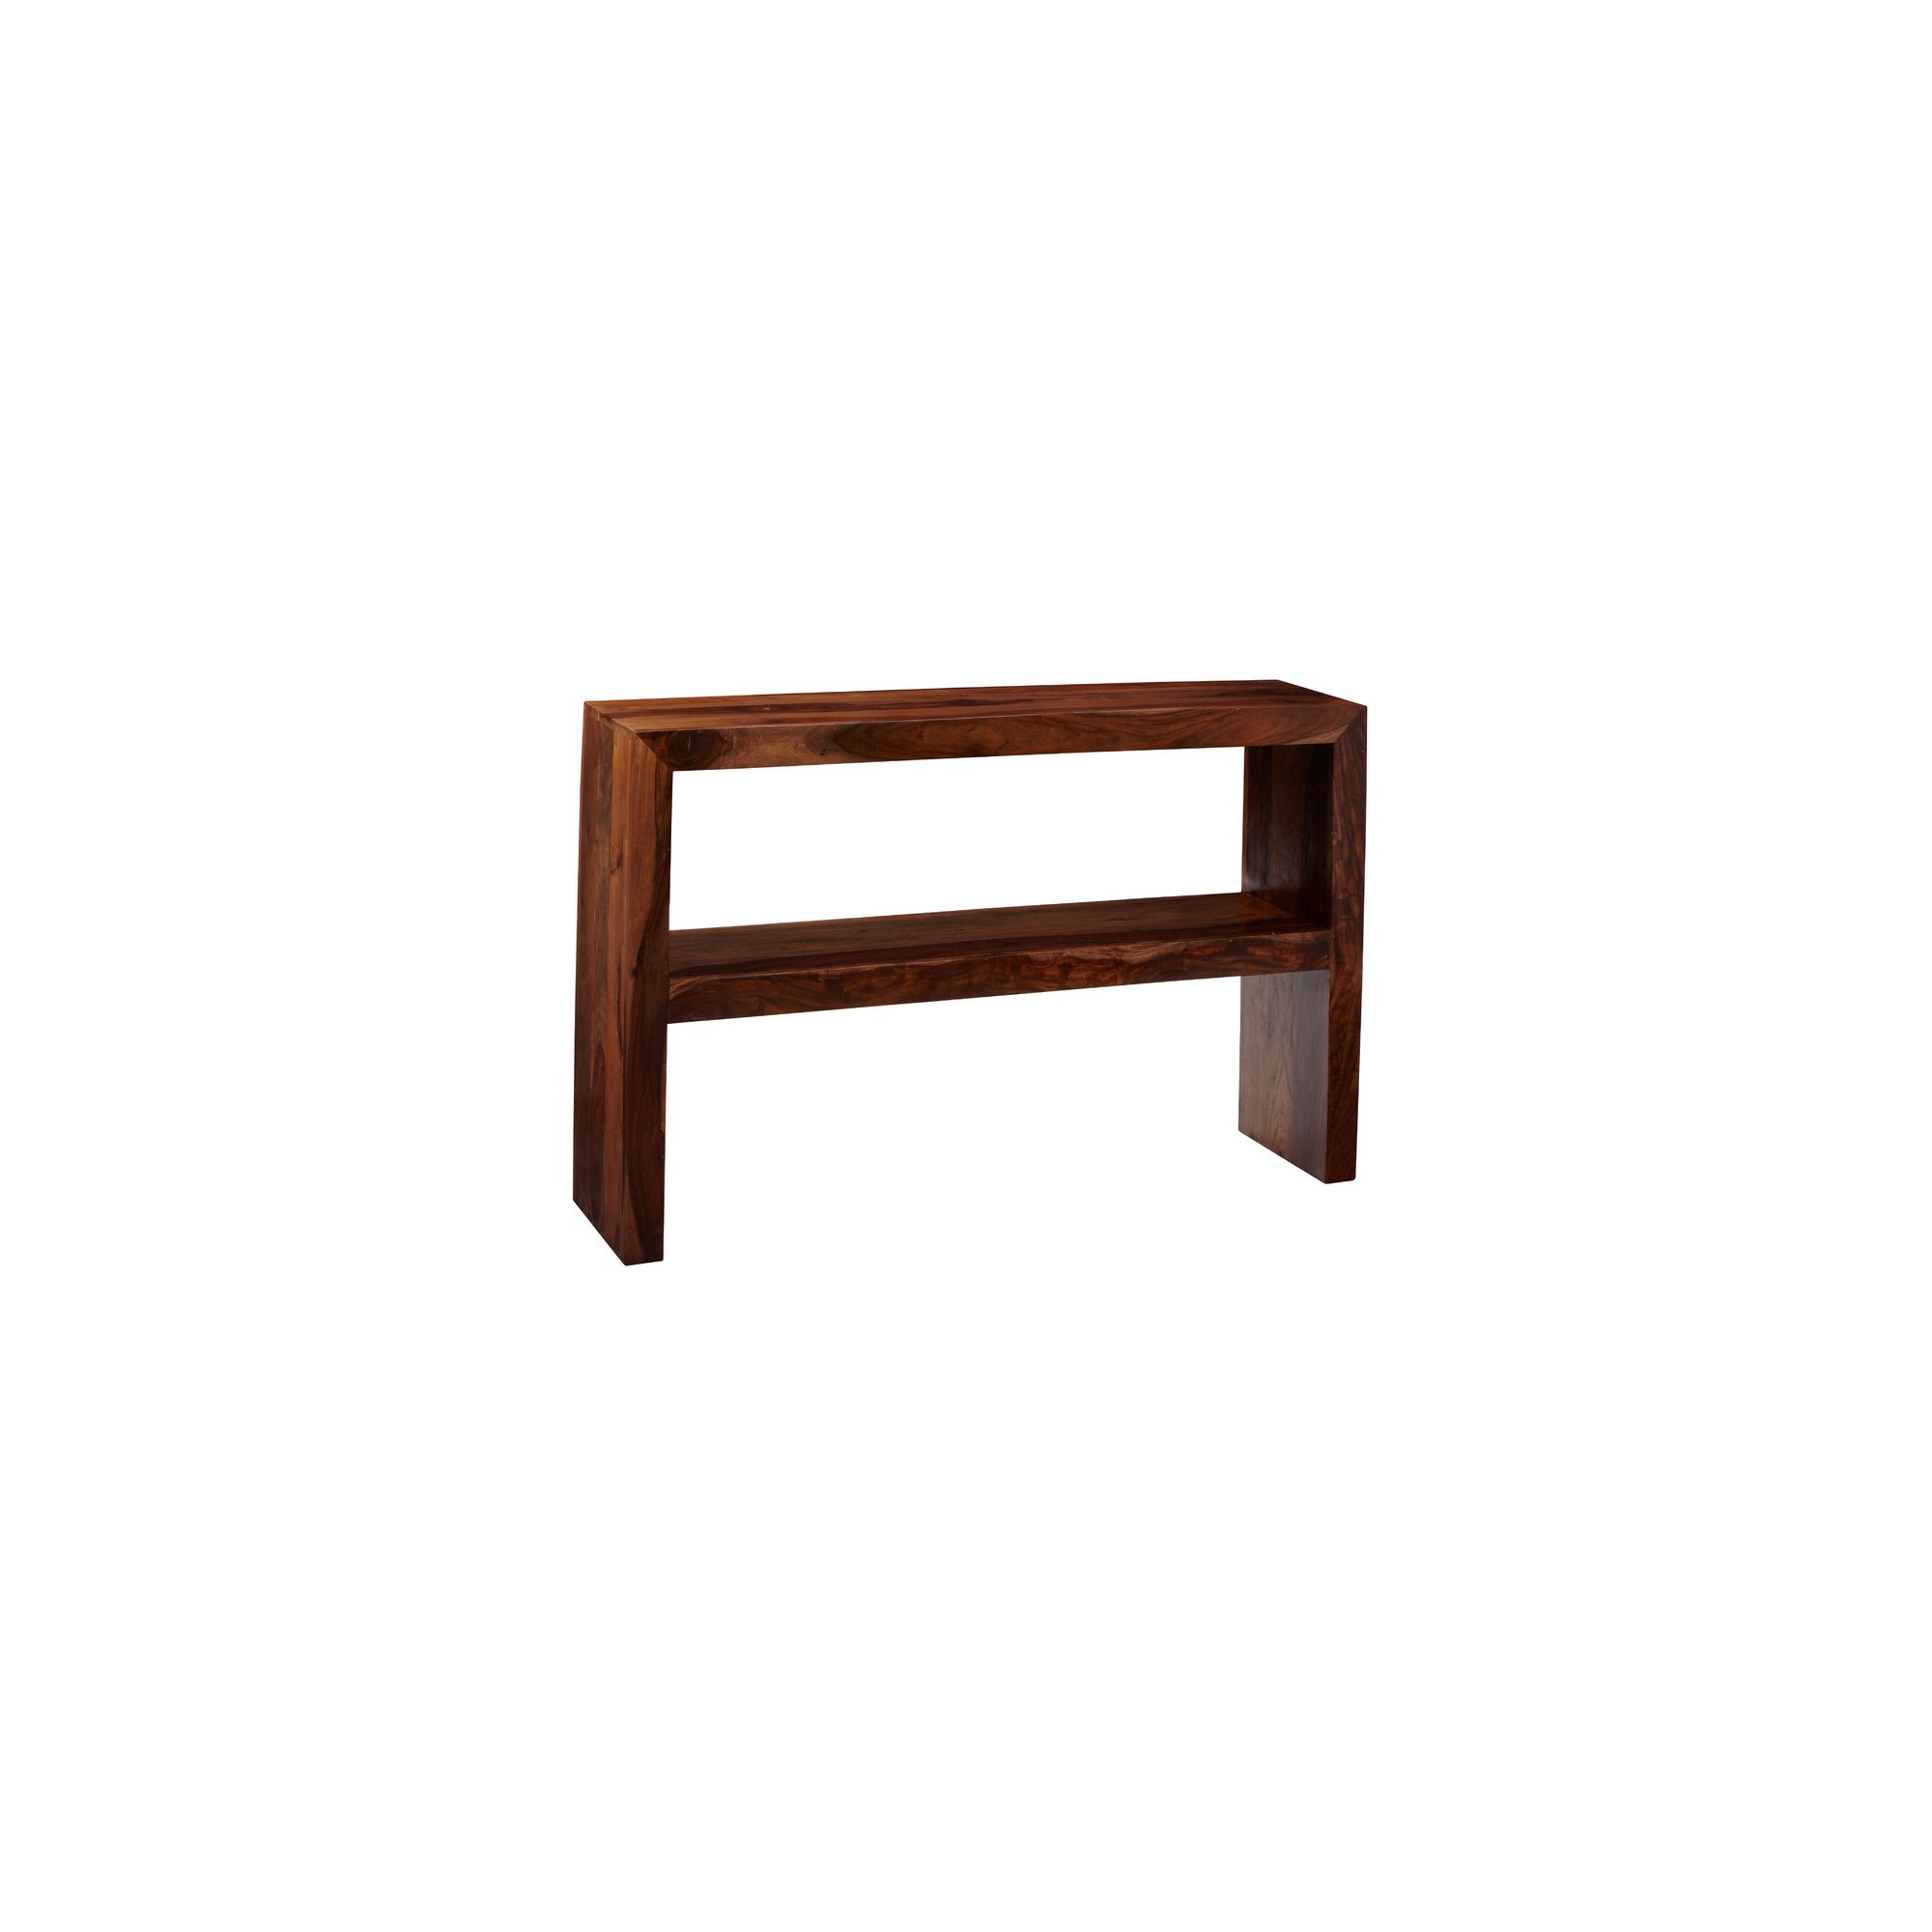 Indian Hub Cube Sheesham Console Table with Shelf at Tesco Direct